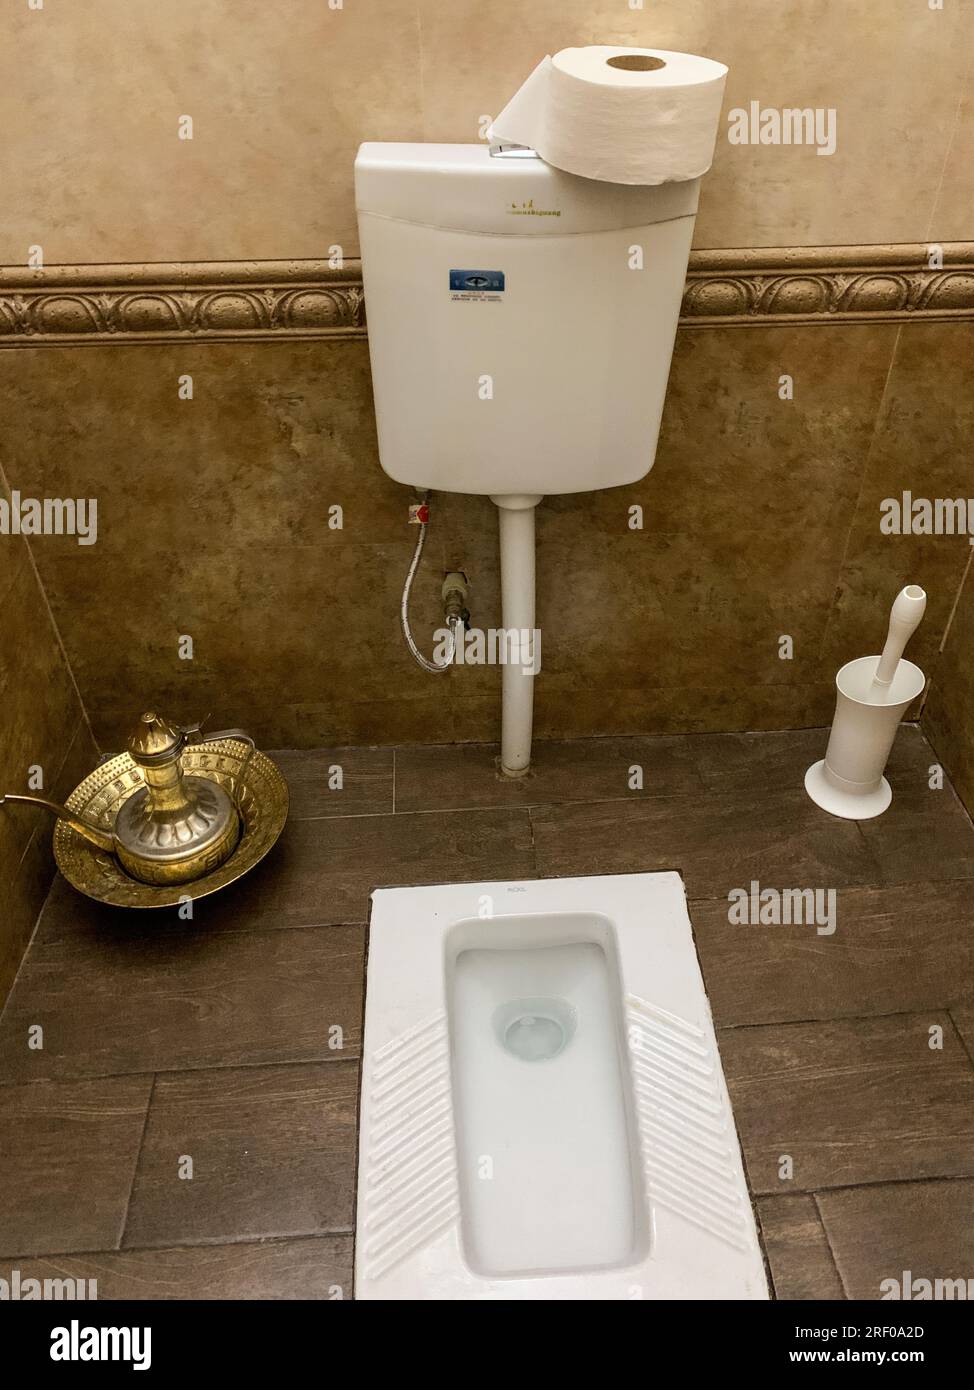 Kazakhstan, Almaty. Turkish or Squat Toliet.  Note Ewer of Water for those who prefer to wash rather than wipe with toilet paper. Stock Photo